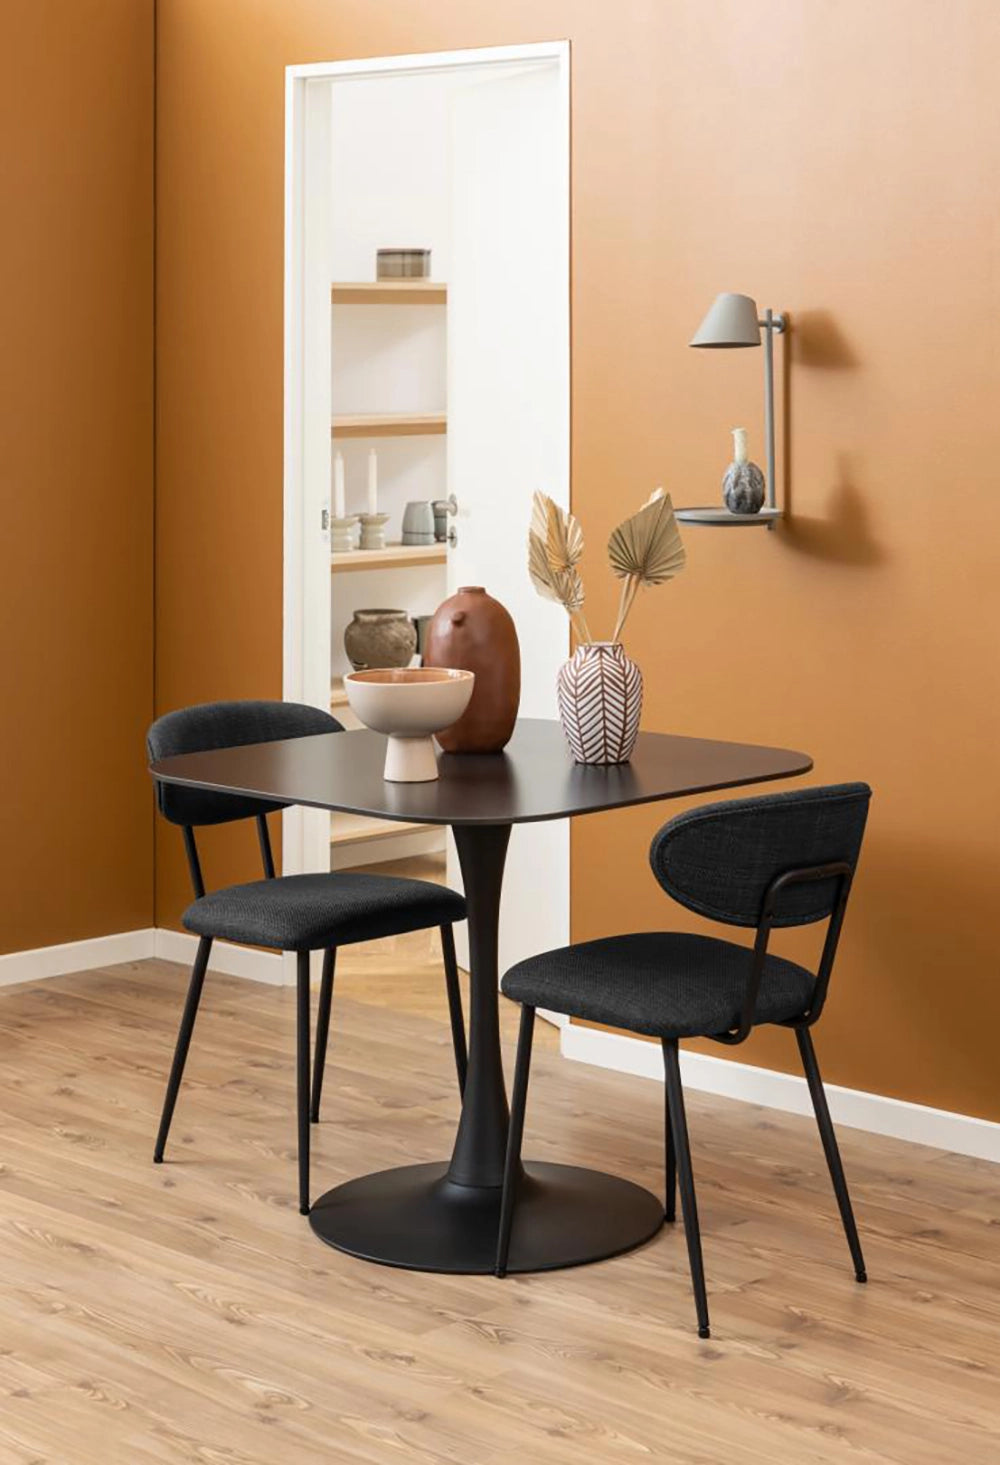 Dune Square Dining Table in Black Finish with Upholstered Chair and Wall Lampshade in Breakout Setting